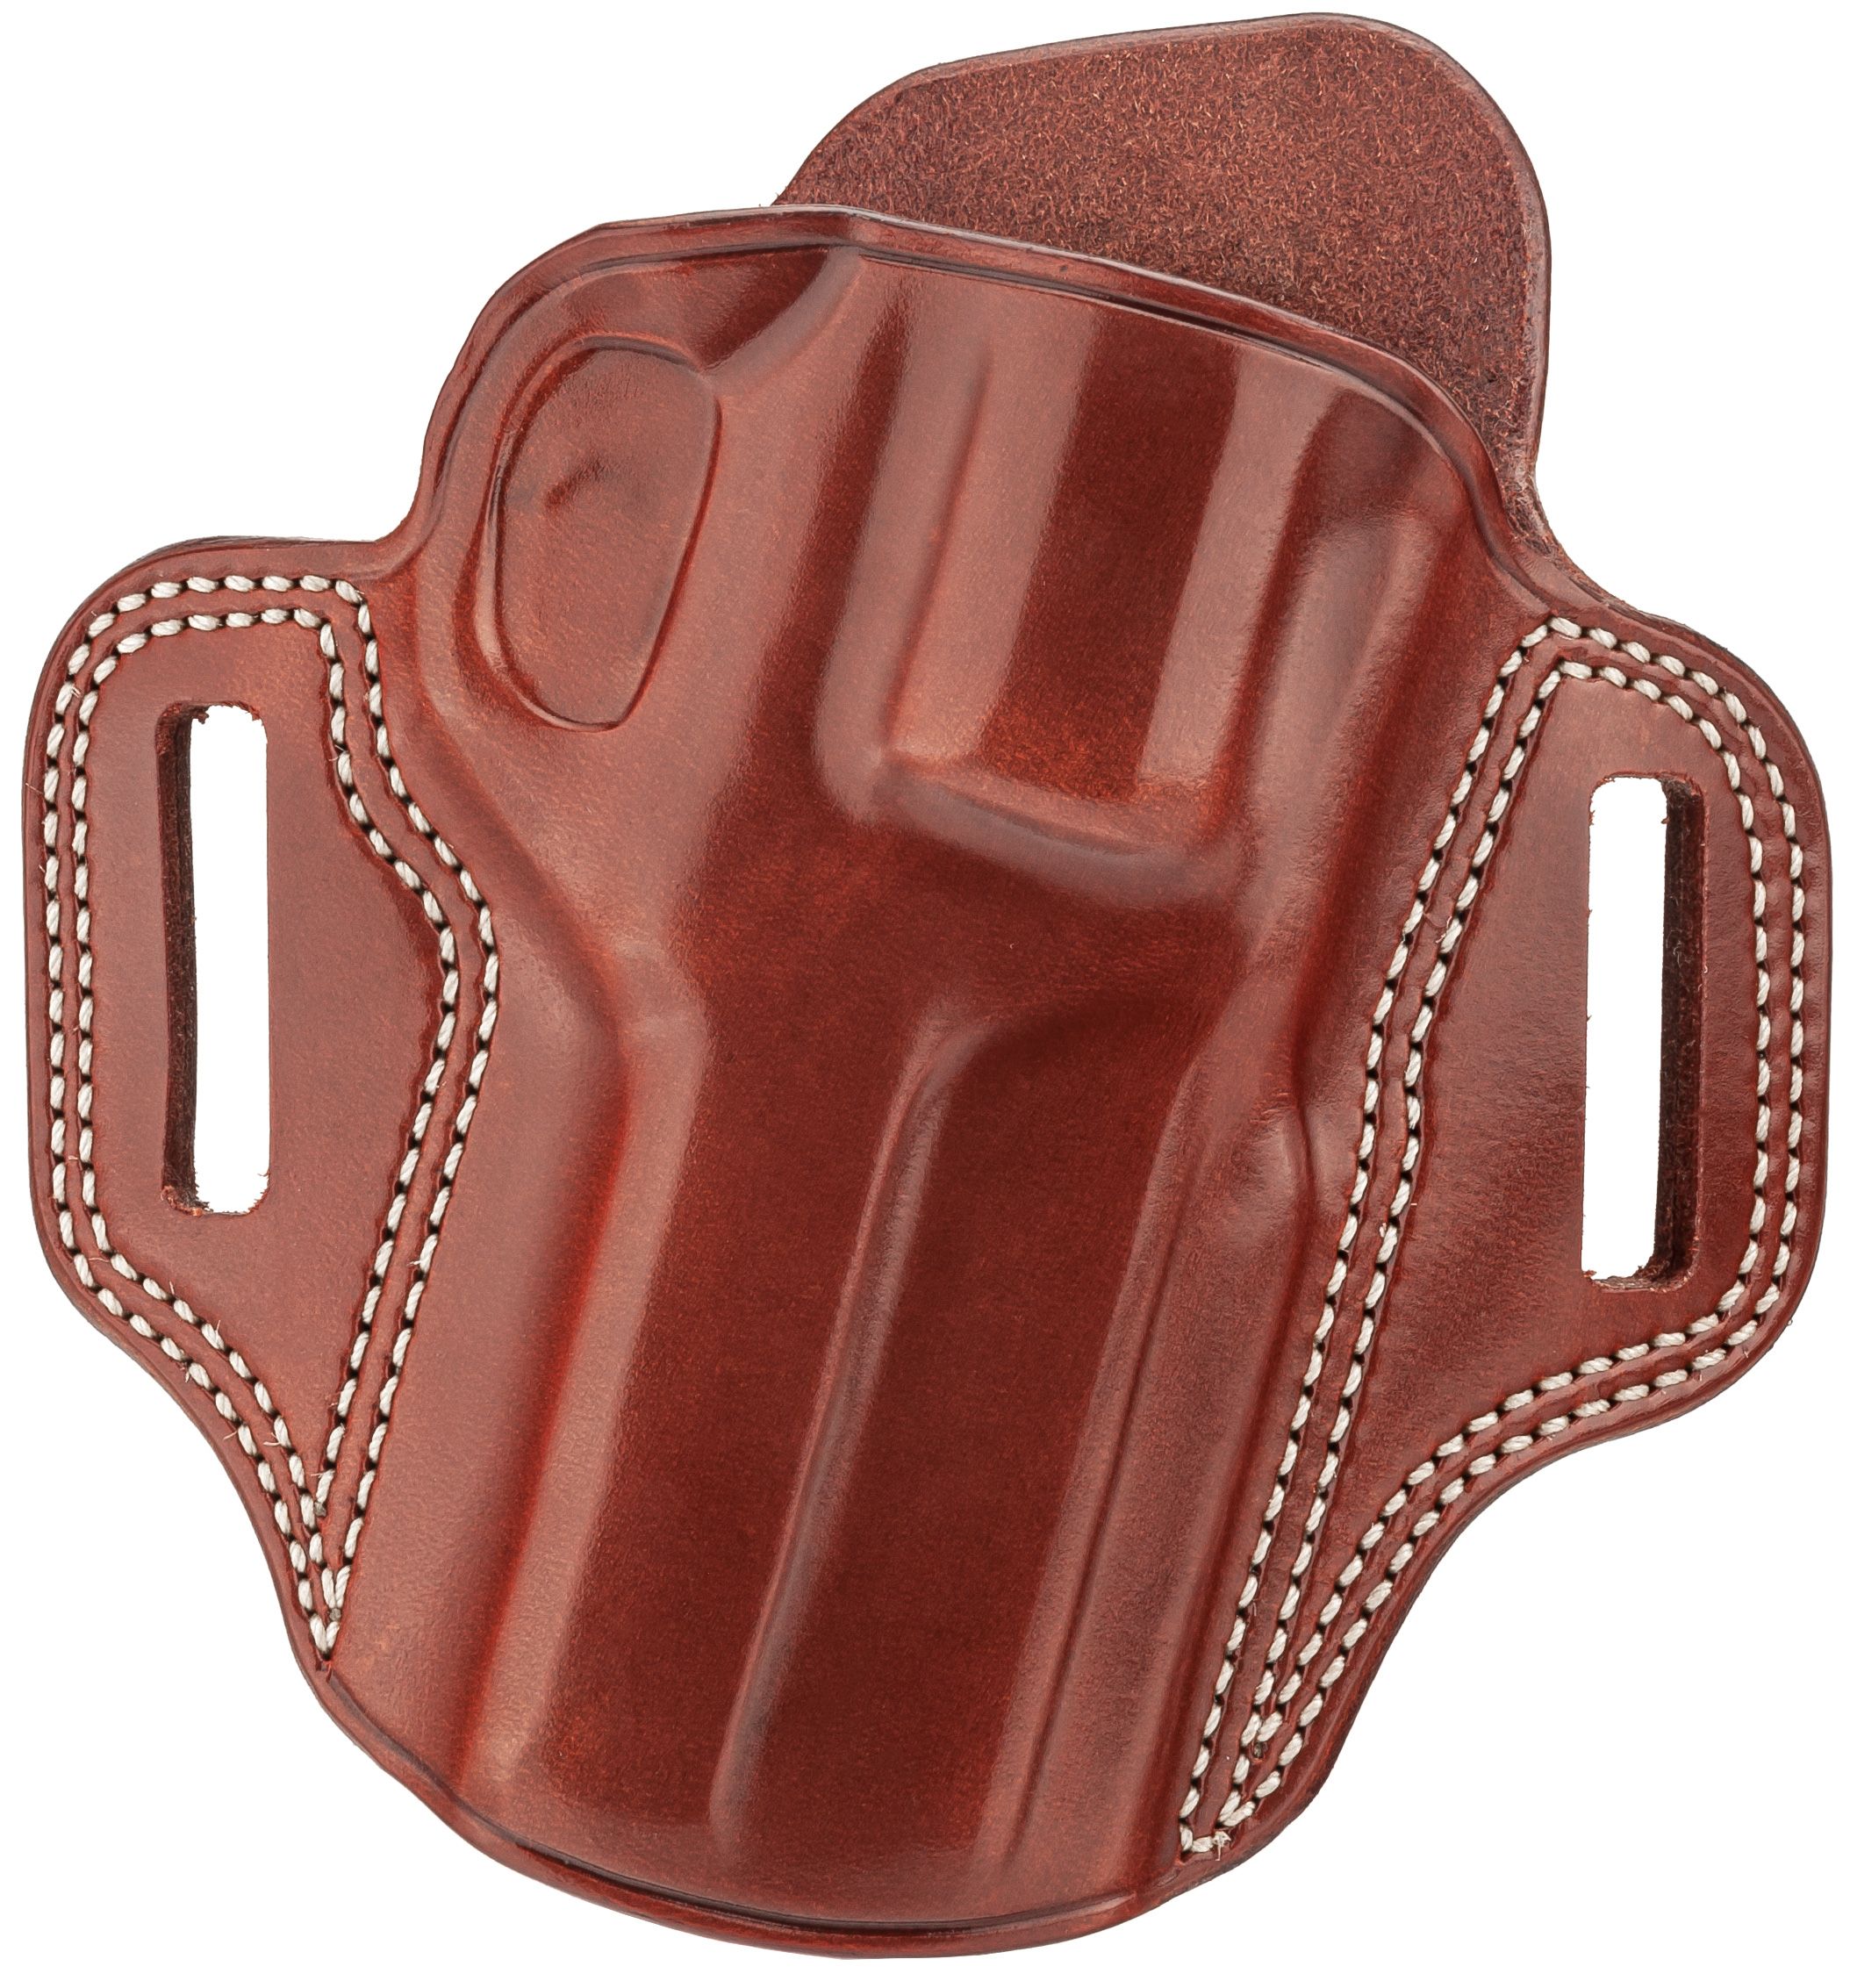 Galco Combat Master Leather Belt Holster Chiappa Rhino 40DS 4in Right : CM314